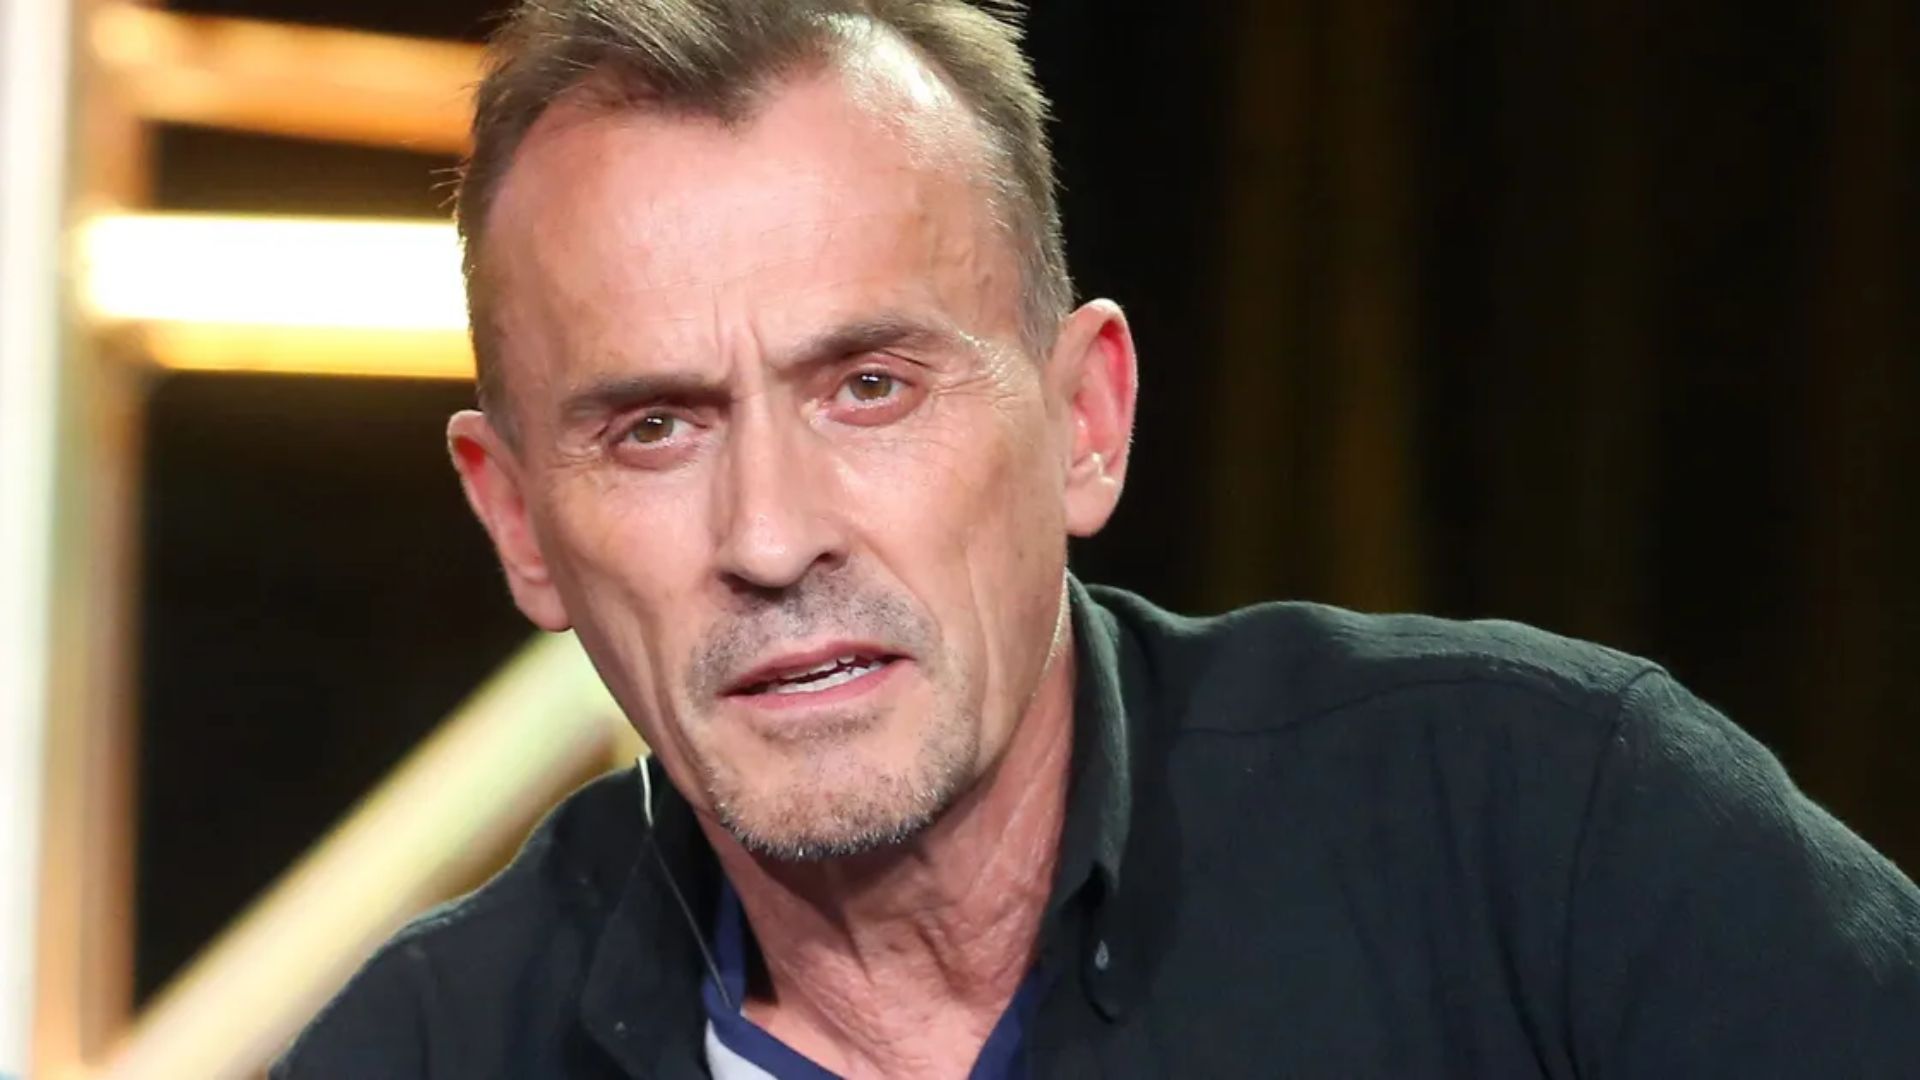 Robert Knepper - Known For His Role As Theodore "T-Bag" Bagwell In The Fox Drama Series Prison Break